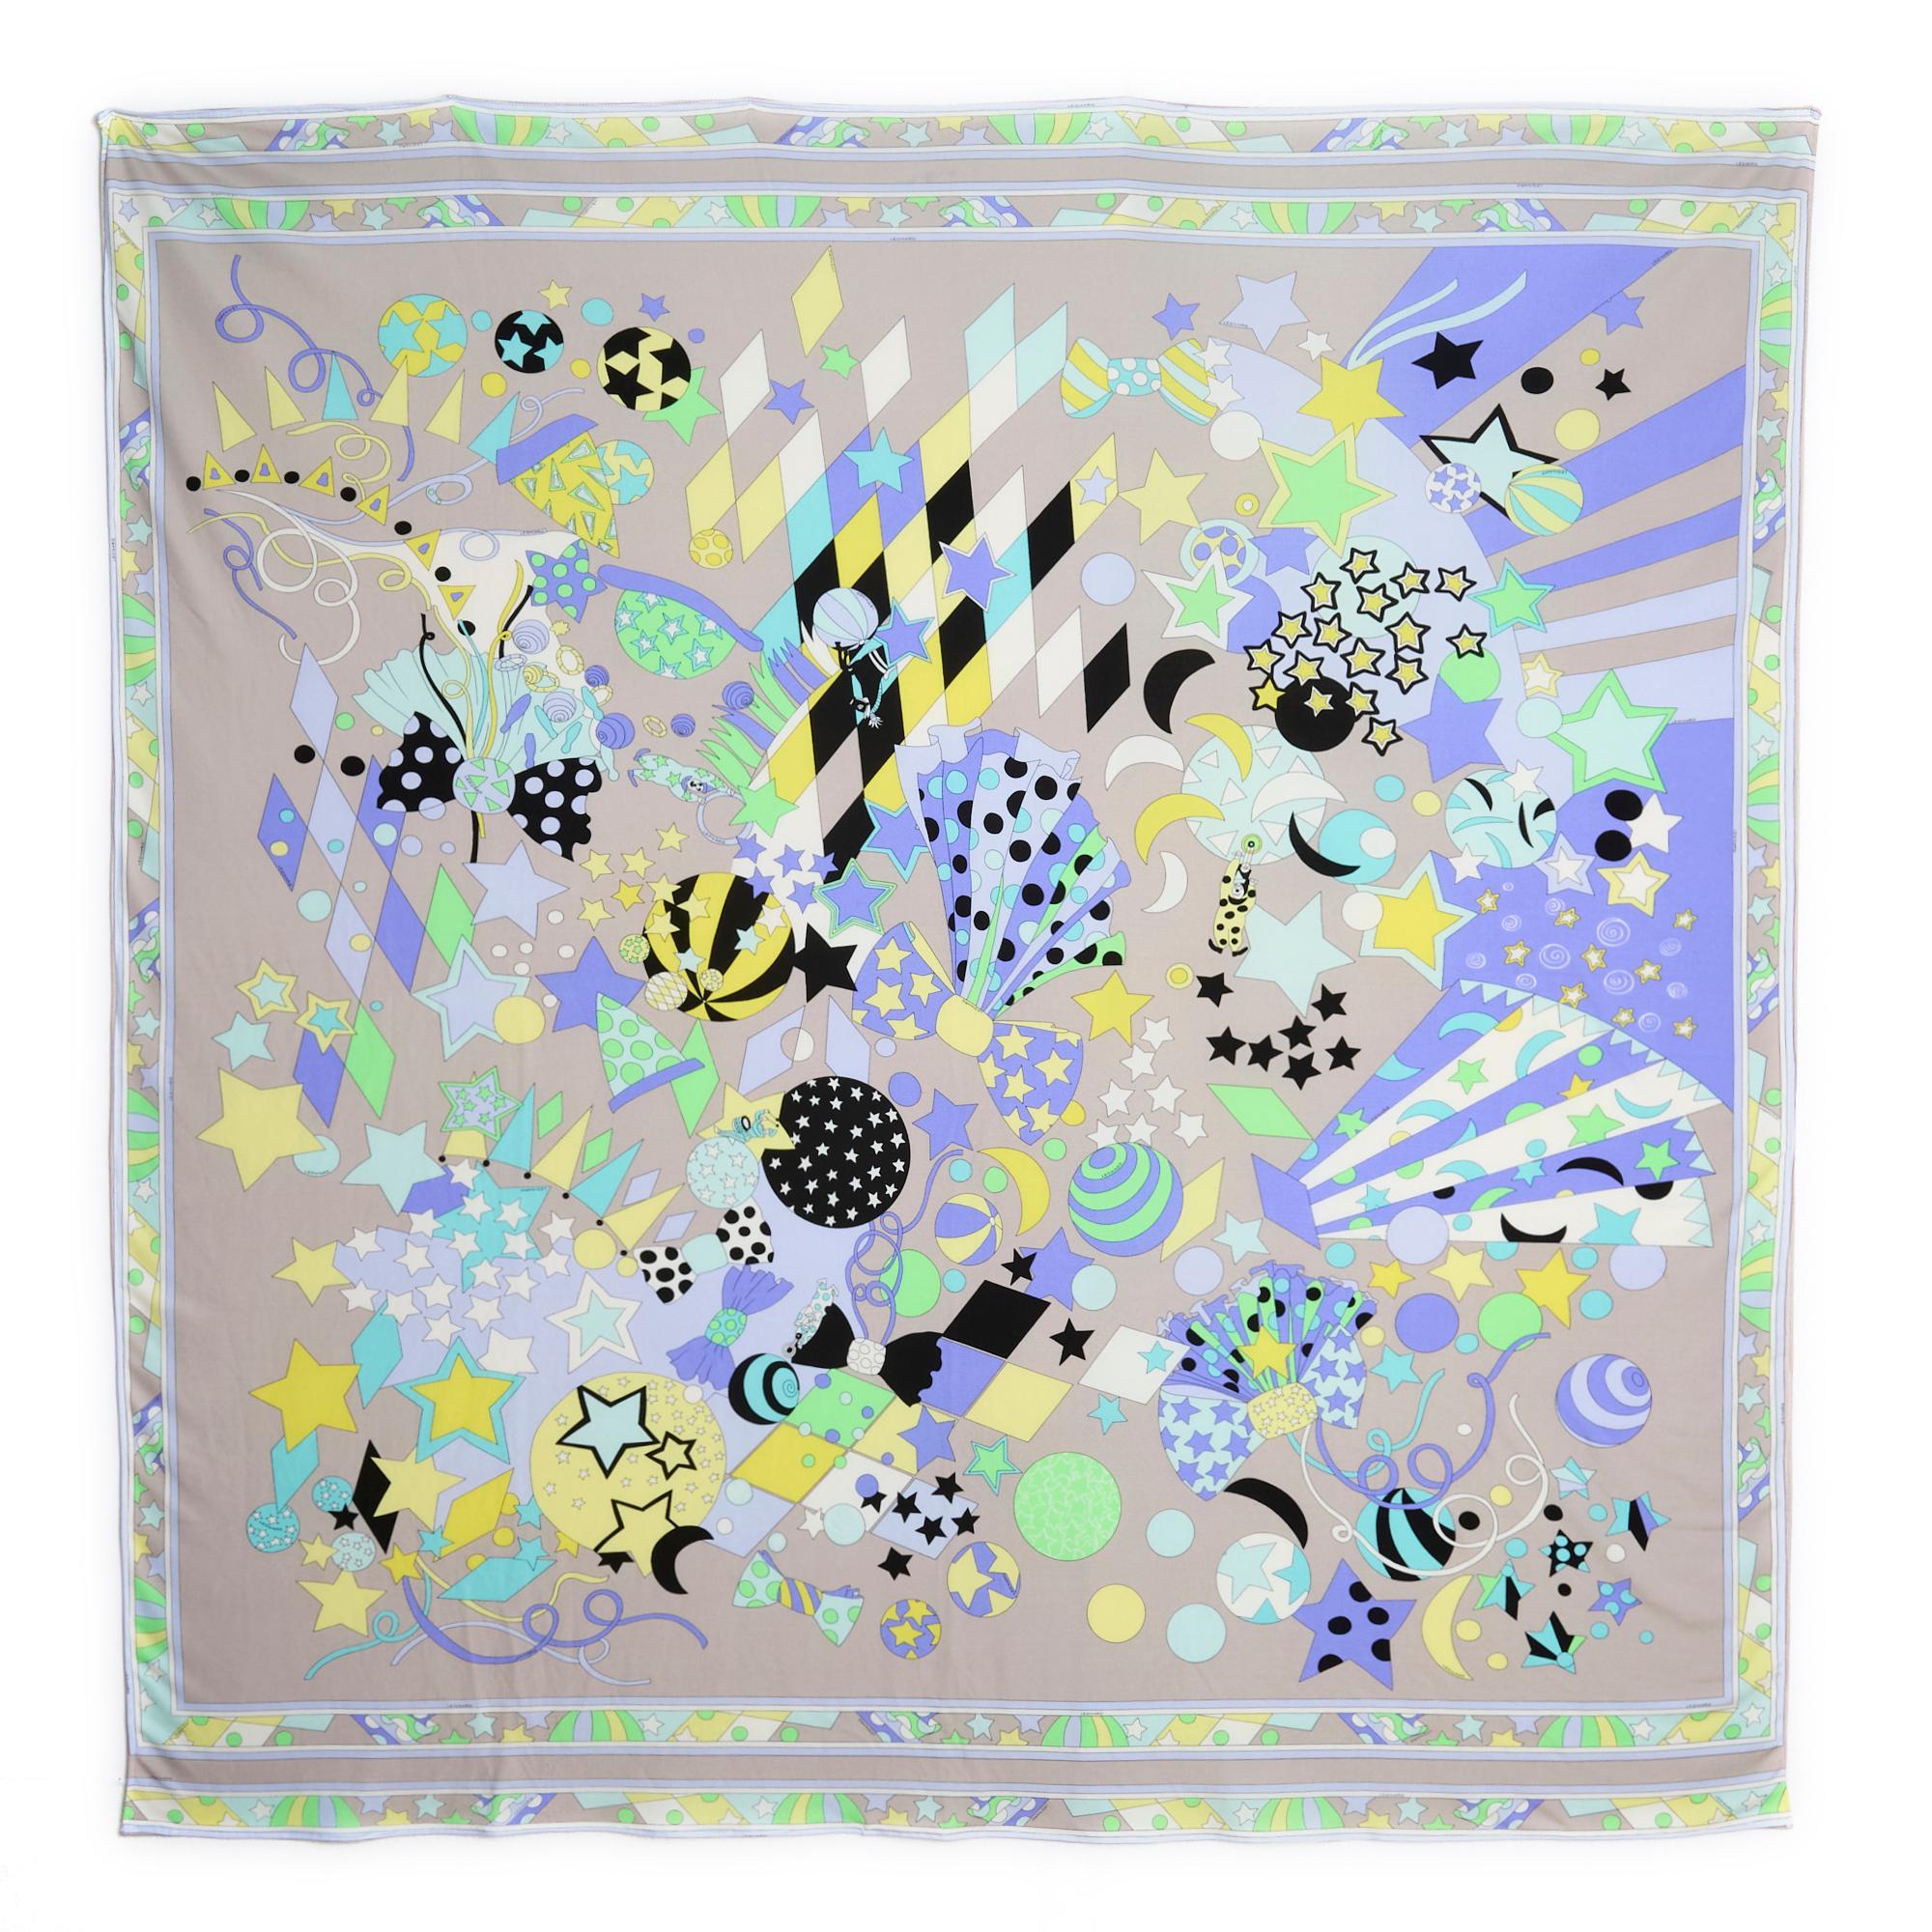 Léonard square scarf 145 in silk jersey, circus-inspired pattern in shades of purple and green on a gray background. Width 145 cm x length 144 cm approximately. The square is vintage, the edges have obviously been sewn by machine, but it remains